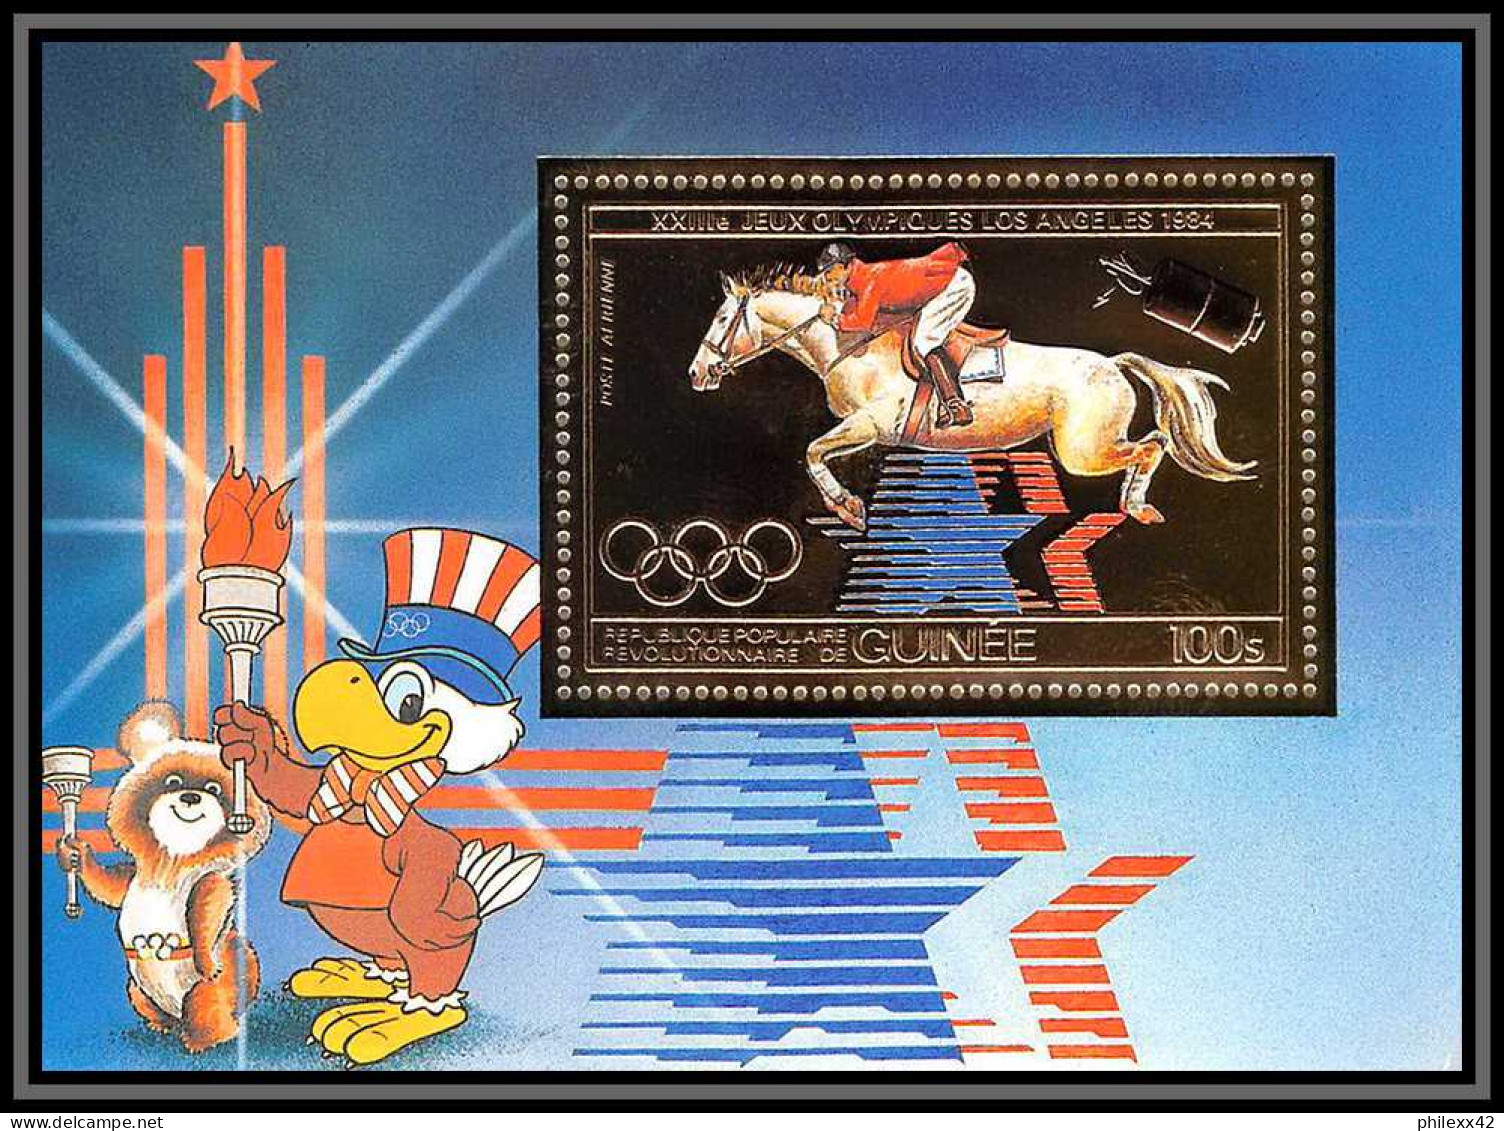 85849/ N°59 A Jumping LOS ANGELES 1984 Jeux Olympiques Olympic Games Guinée Guinea OR Gold Stamps ** MNH Cheval Horse - Sommer 1984: Los Angeles